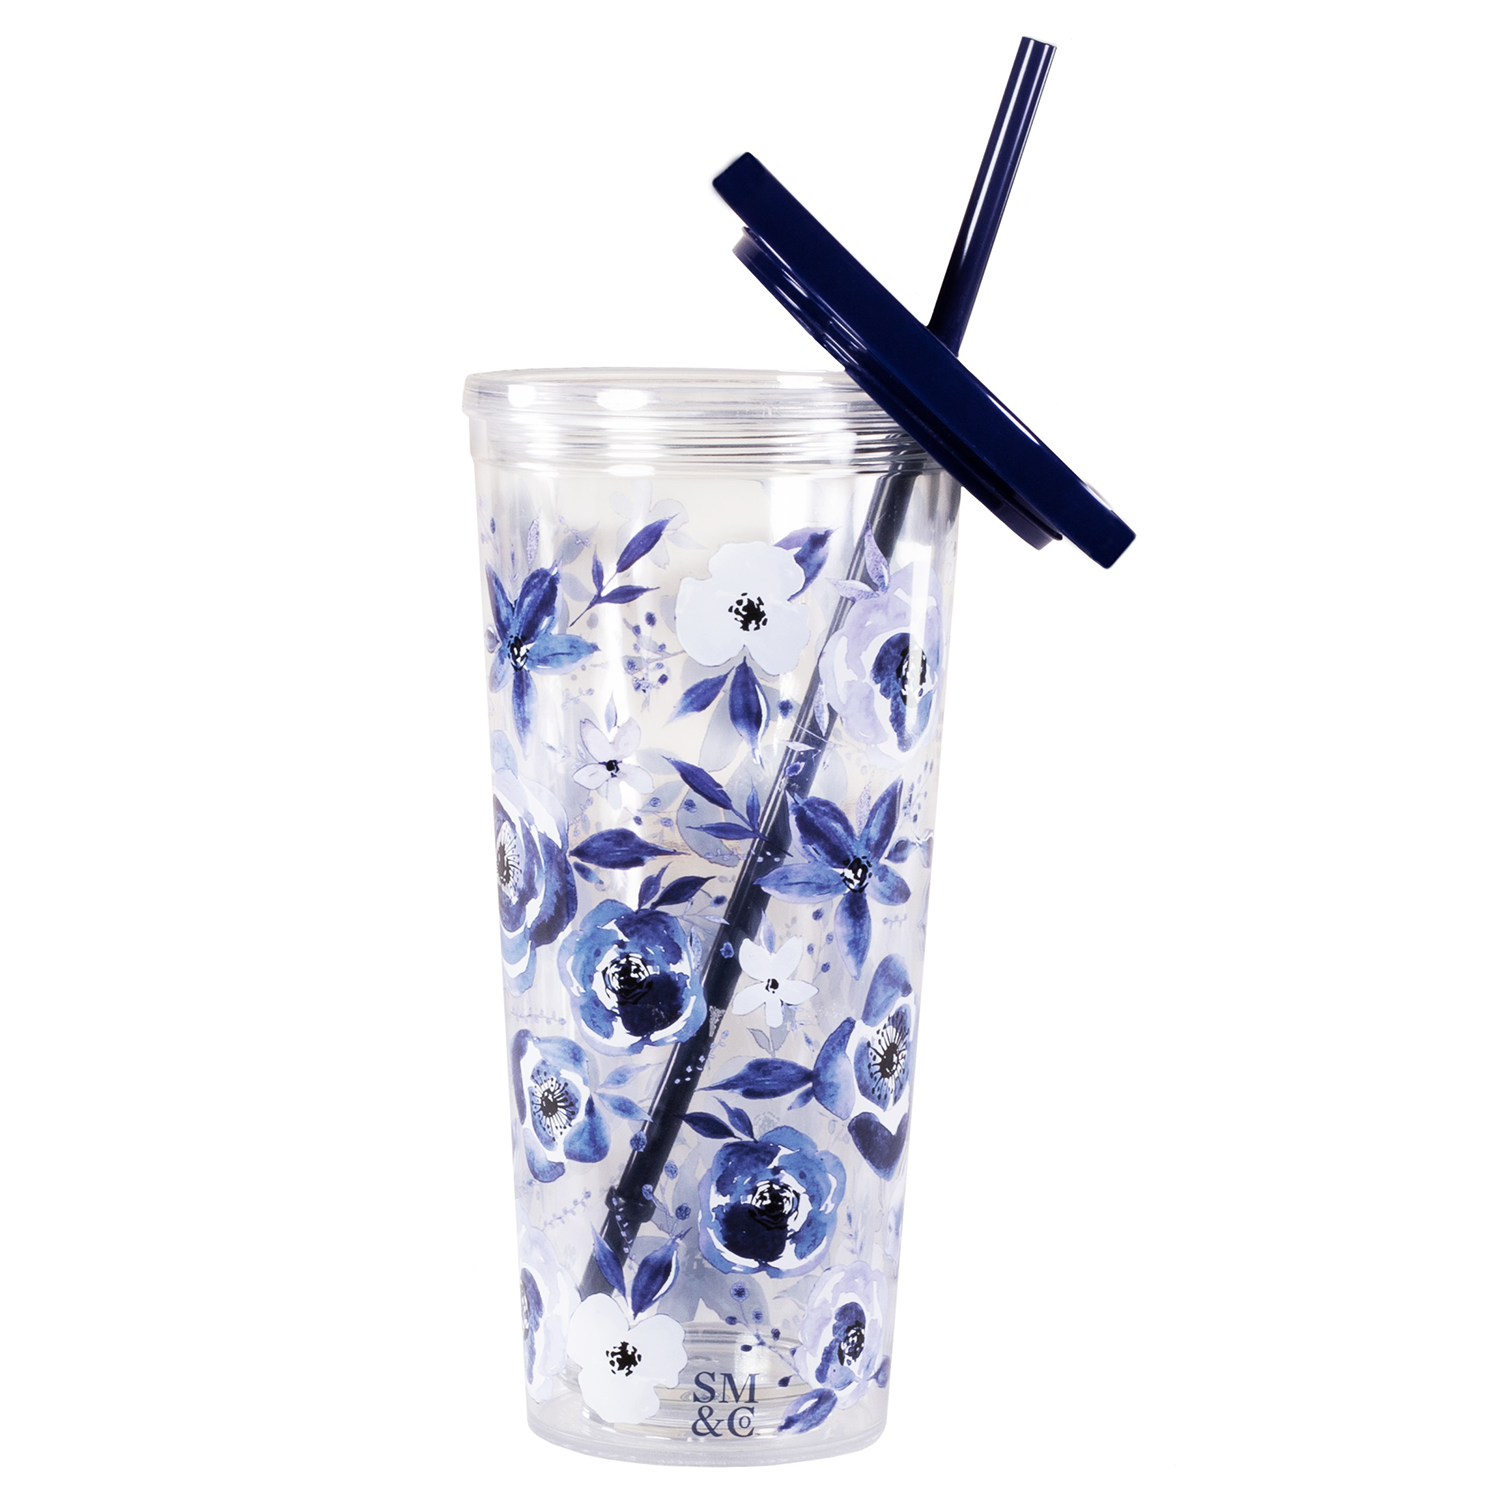 Final Straw Collapsible Reusable Stainless Steel Straw-Artic Melt Blue -  Spoons N Spice